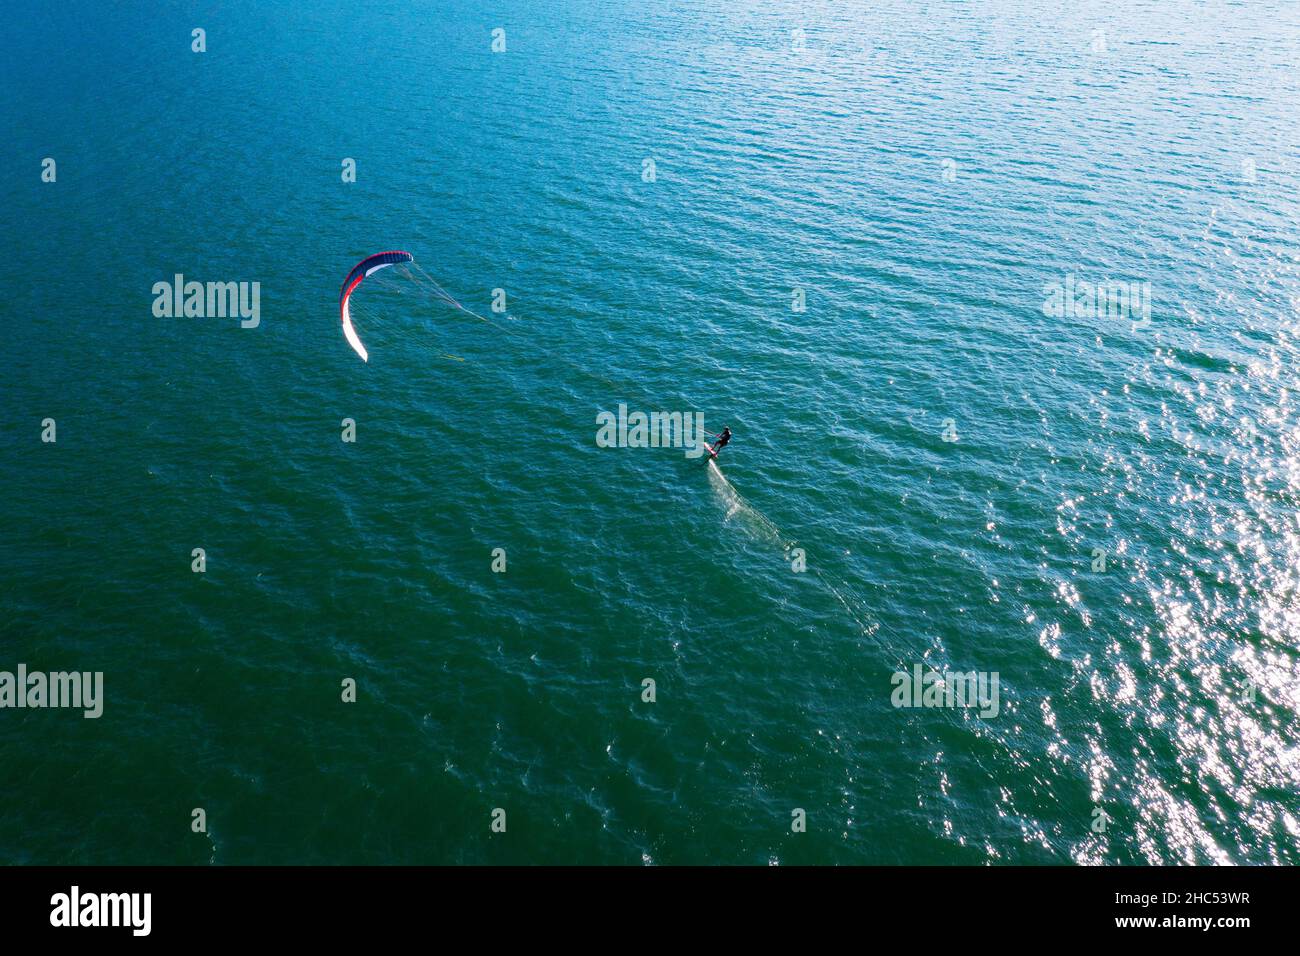 kitesurfer in action, aerial view Stock Photo